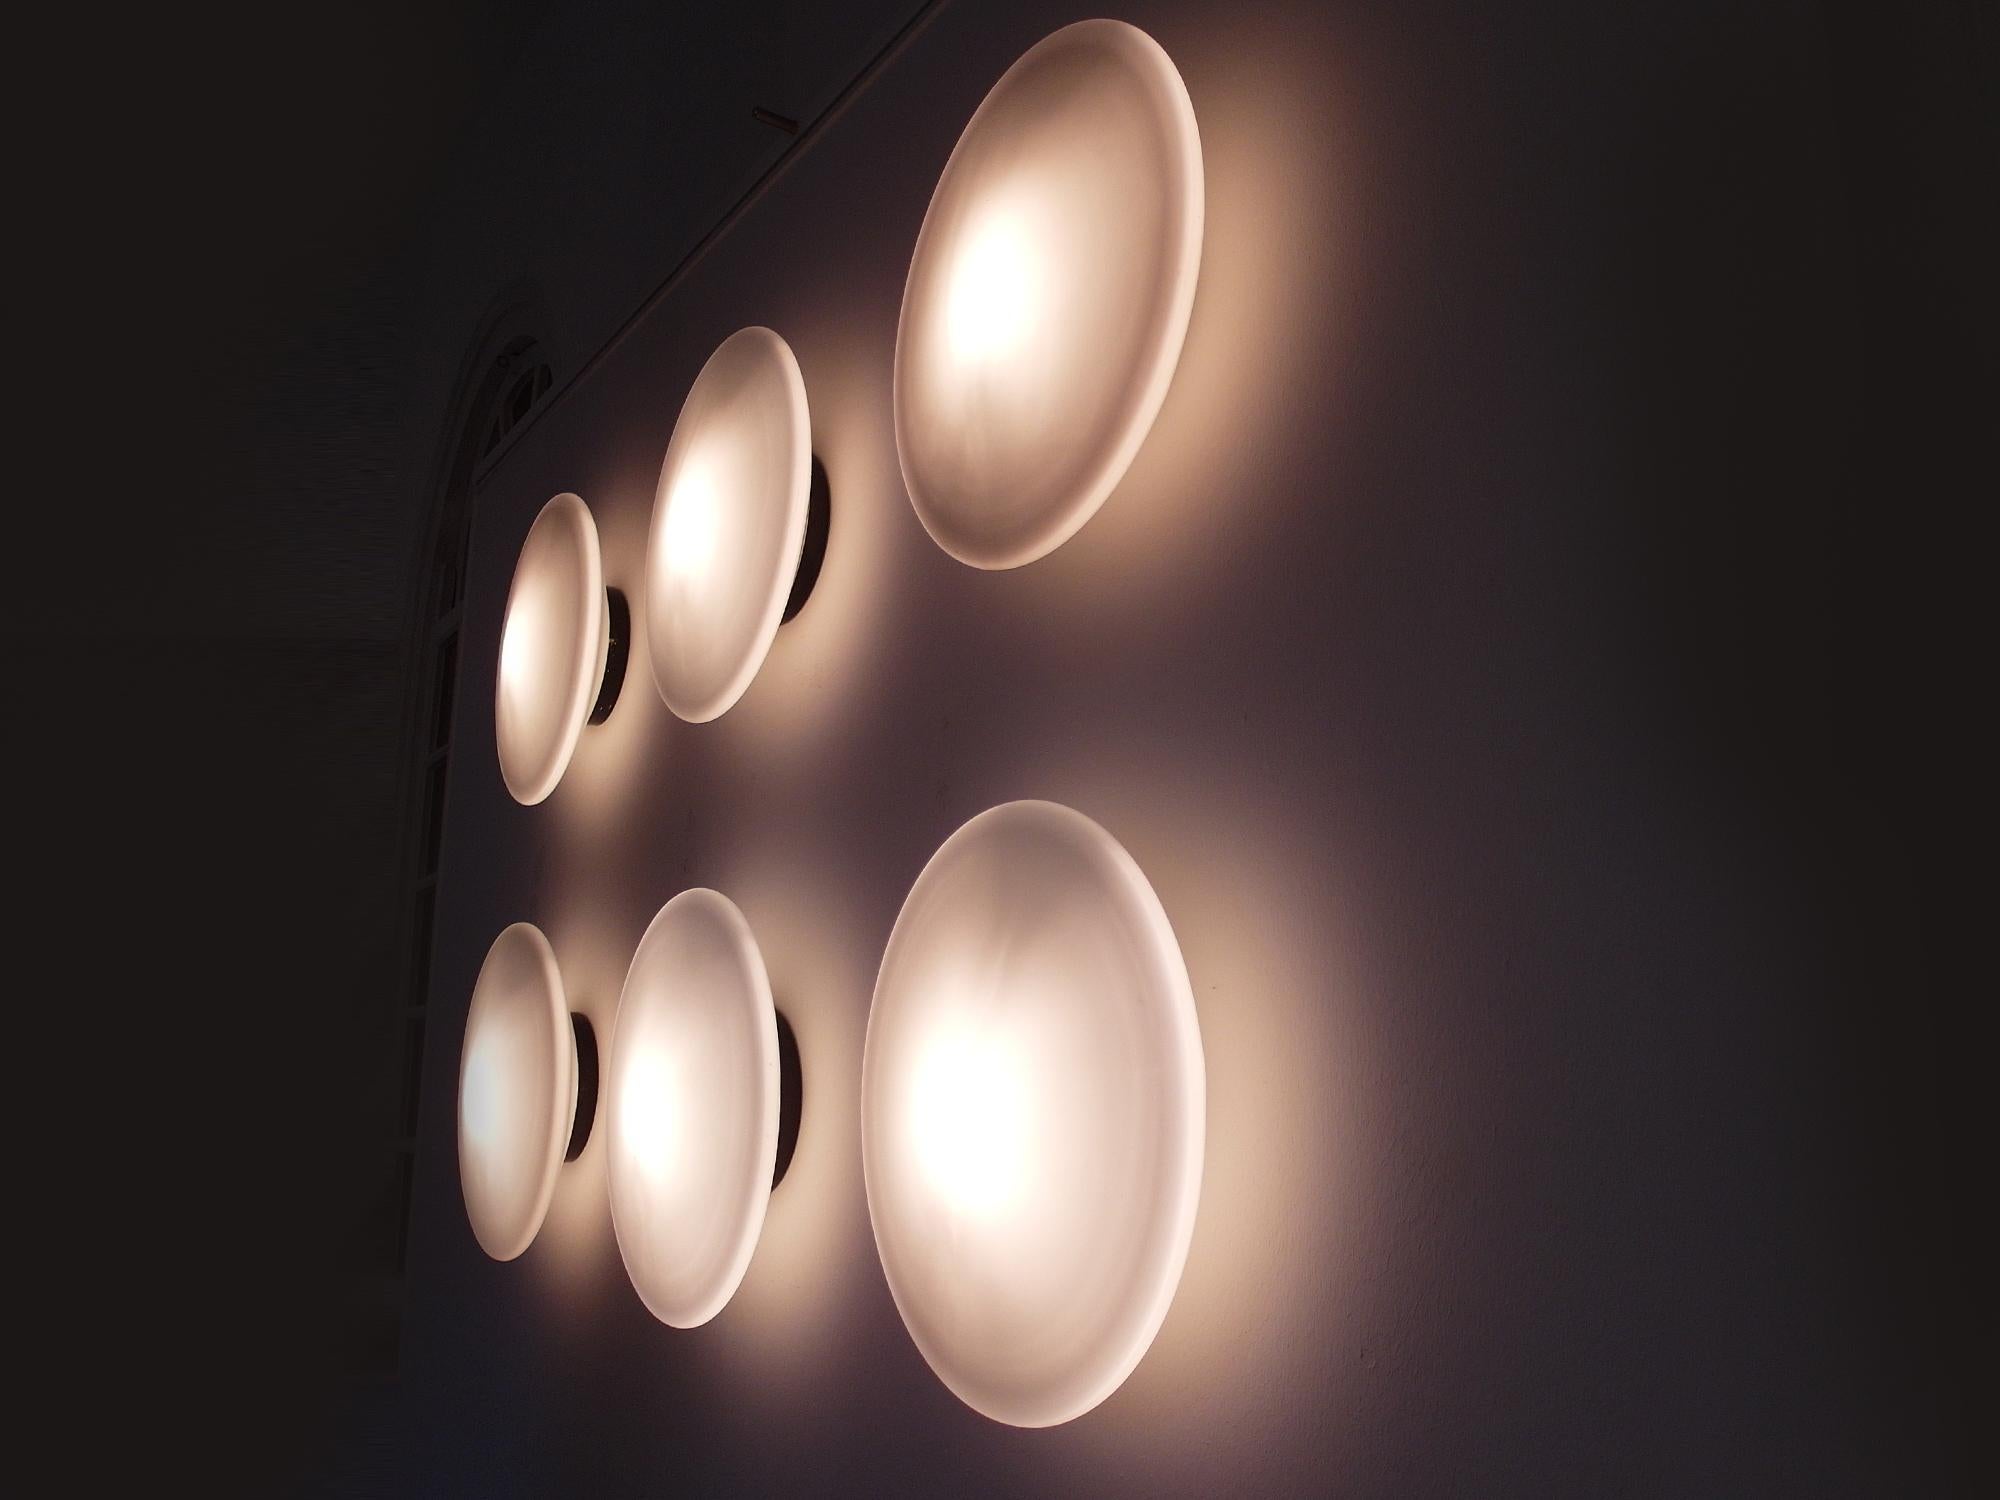 Monumental set of six largest version RAAK B-1412 opaline glass RAAK Discus lights designed by RAAK Amsterdam, The Netherlands 1952. Composed as an installation on the wall, these six Minimalist Discus sconces made of black metal and original